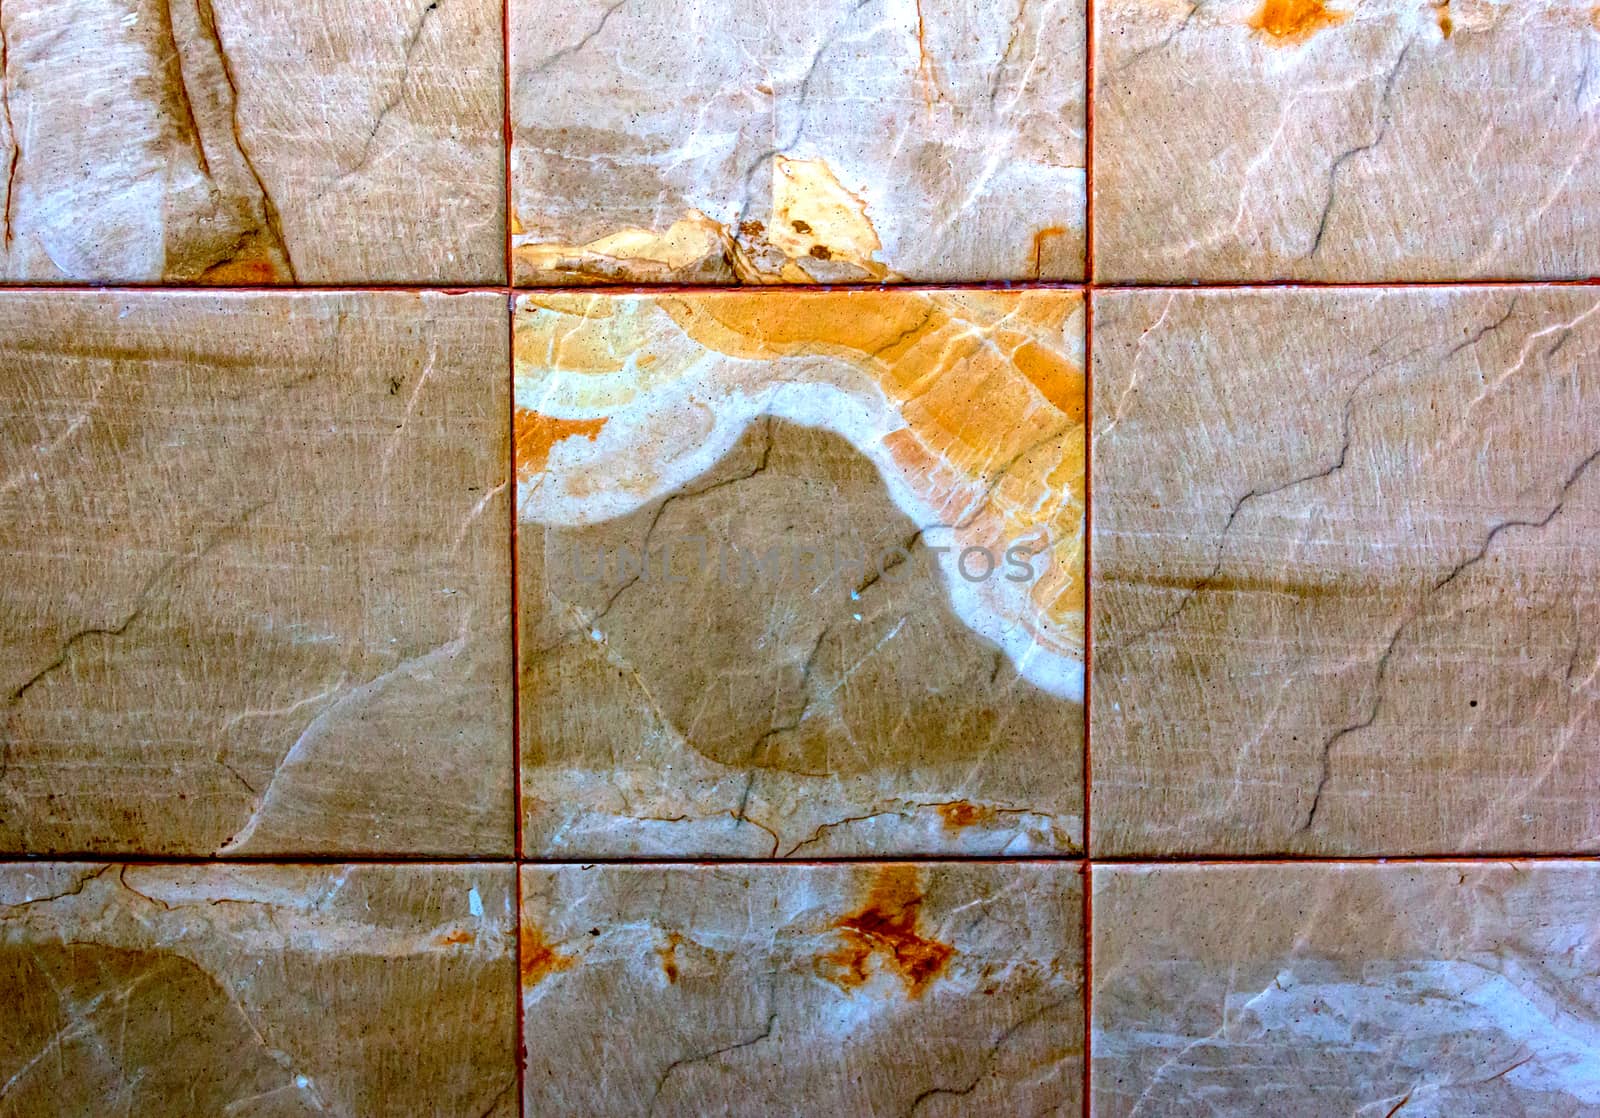 Patterned of tiles.This image shows the patterns on the tiles.